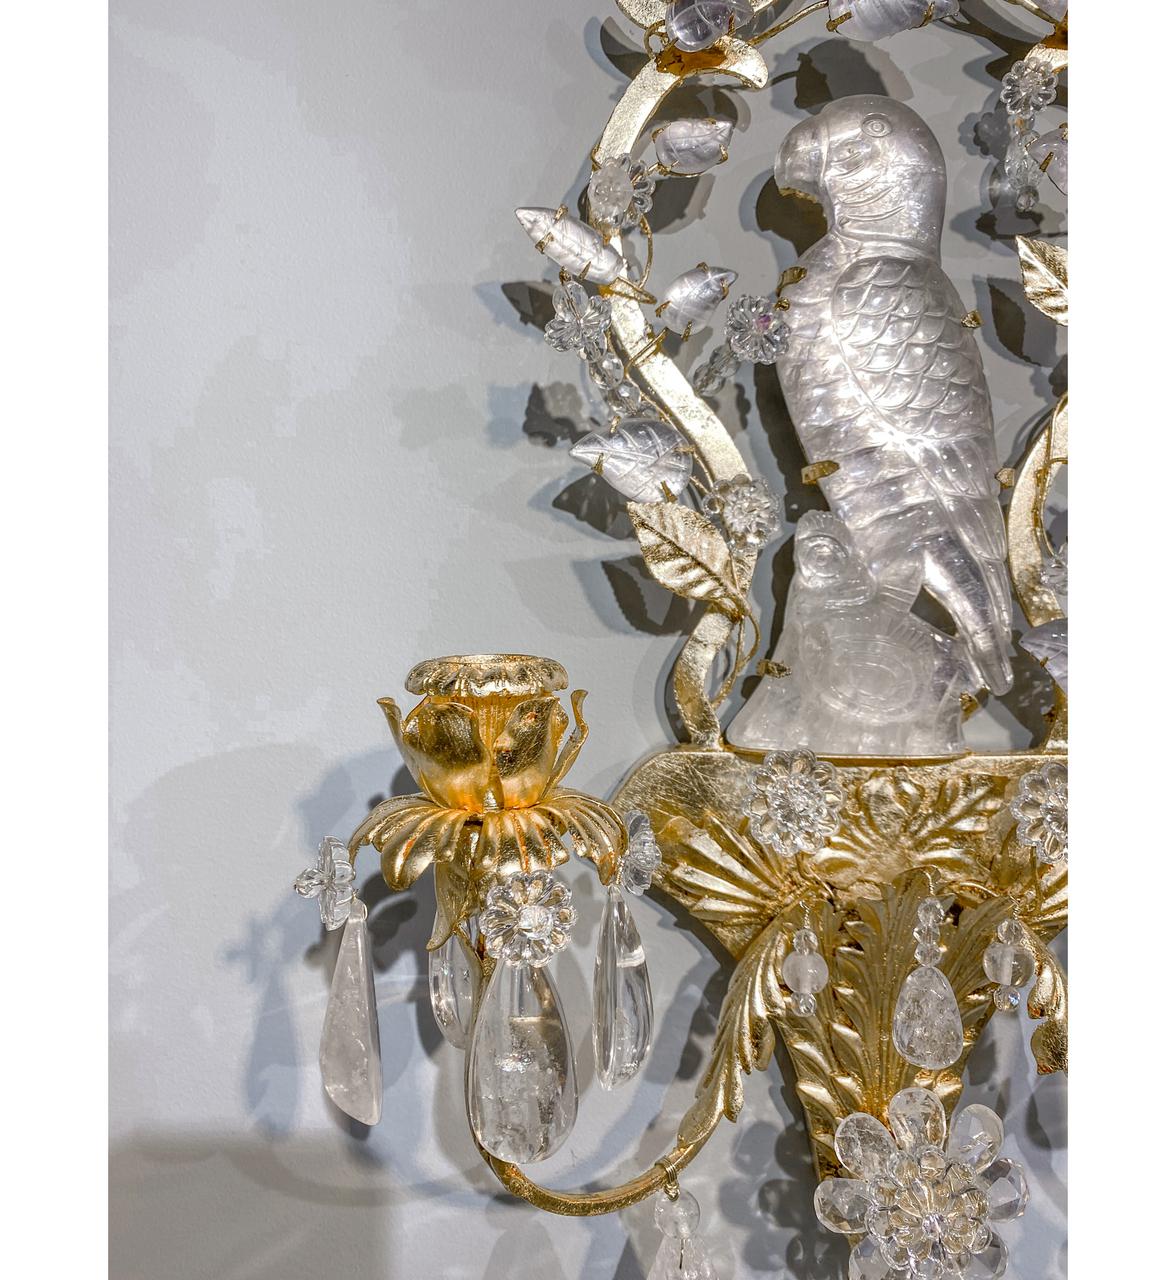 Rock Crystal and Gilt Bronze Sconces with Floral Accents & Carved Perched Parrot In Good Condition For Sale In New York, NY